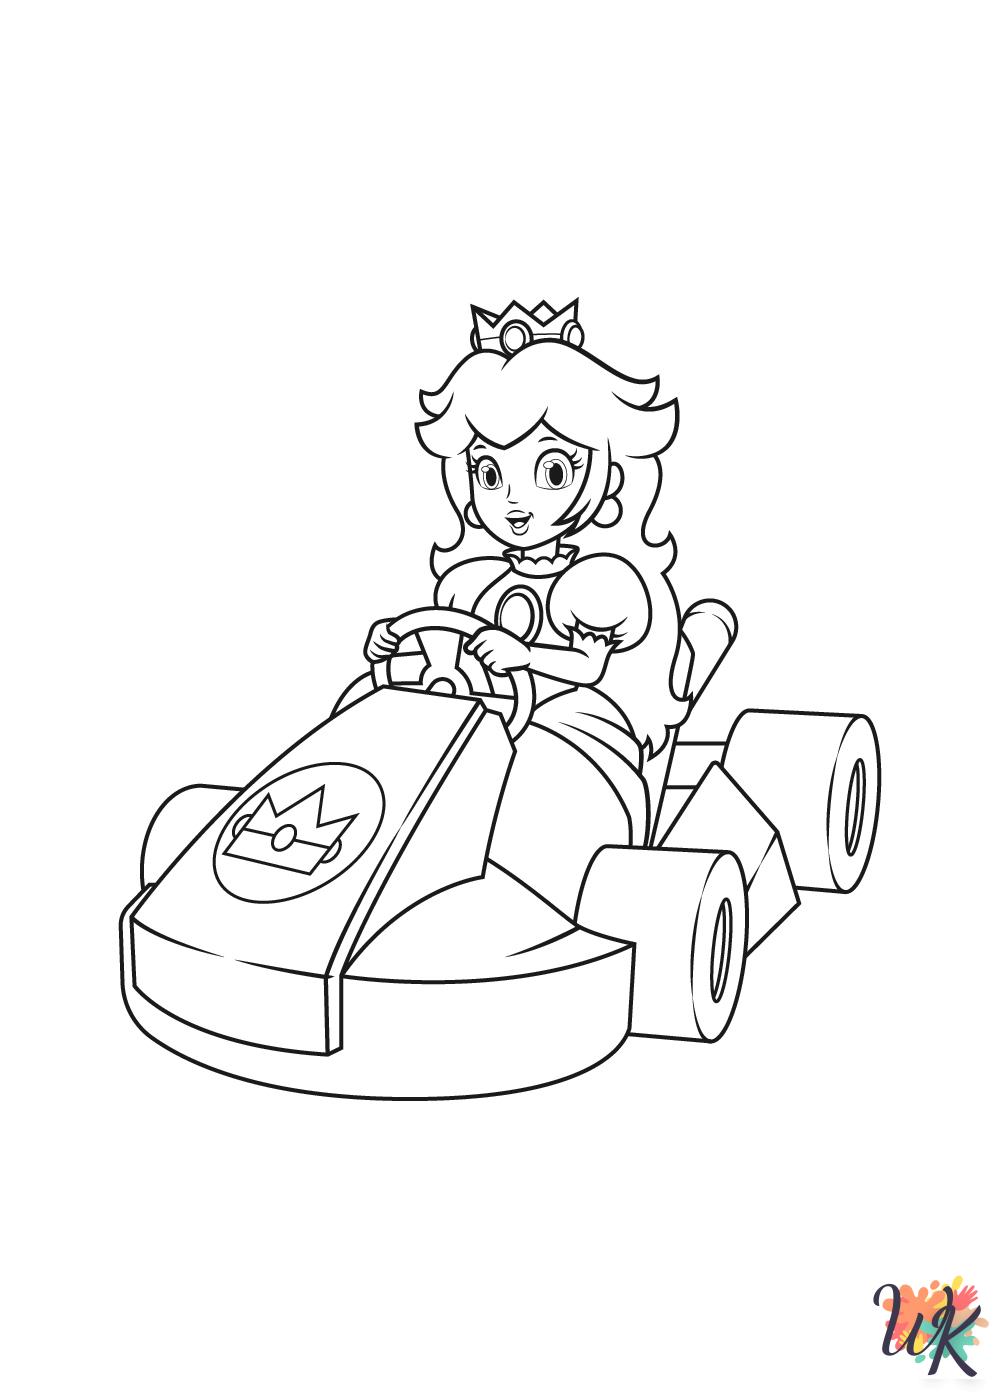 fun Princess Peach coloring pages